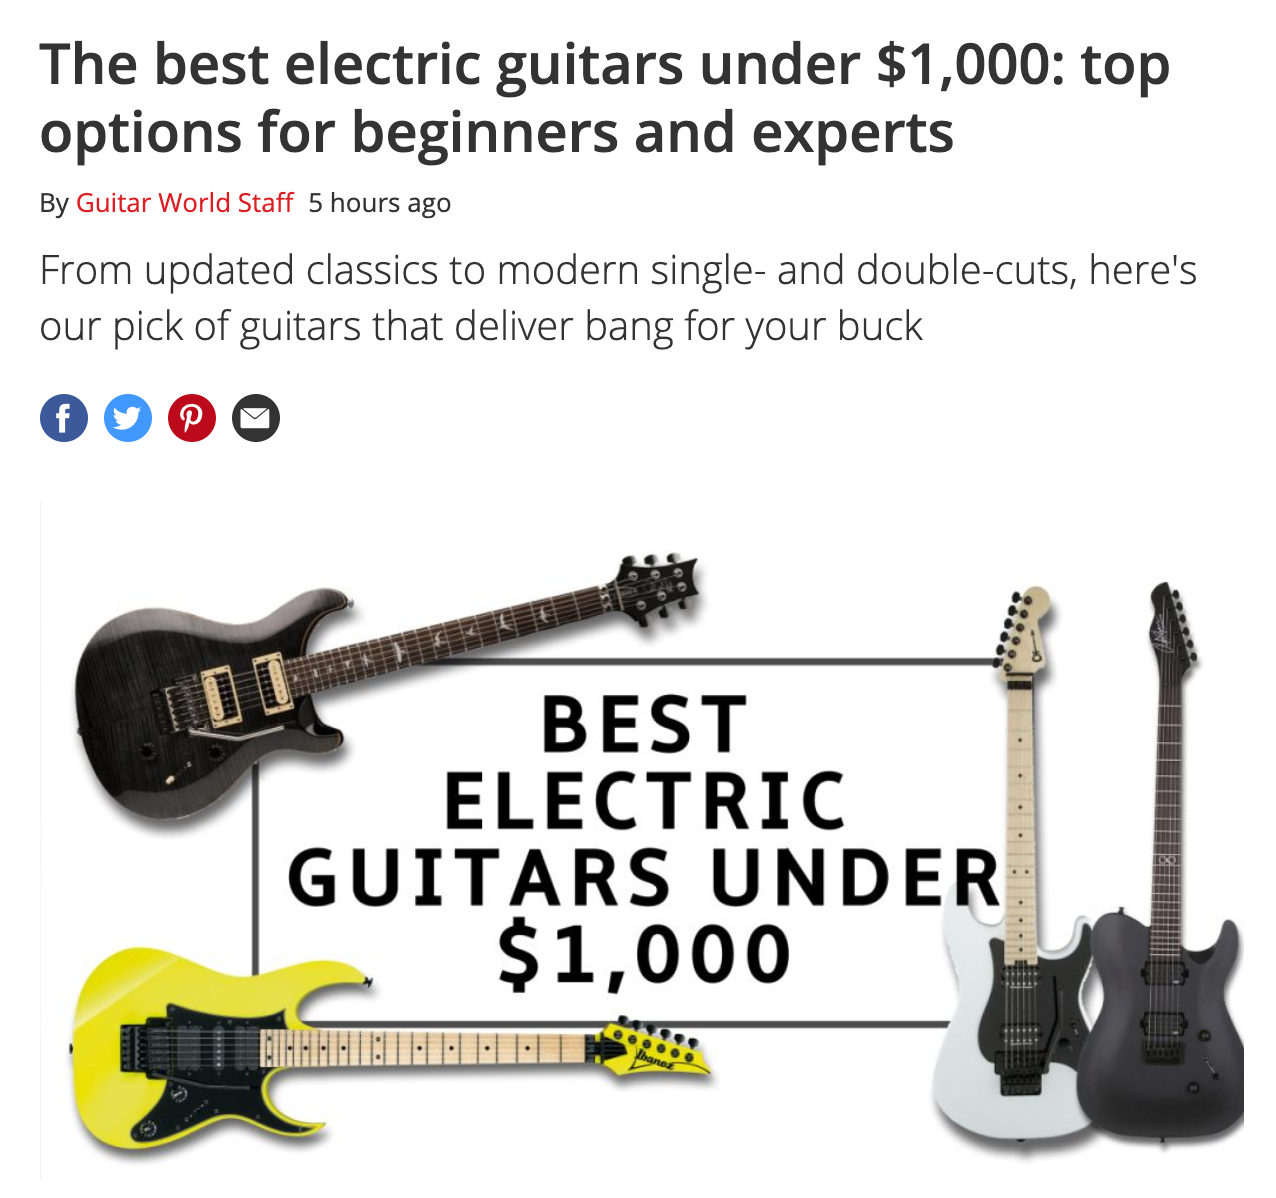 The best electric guitars under $1,000